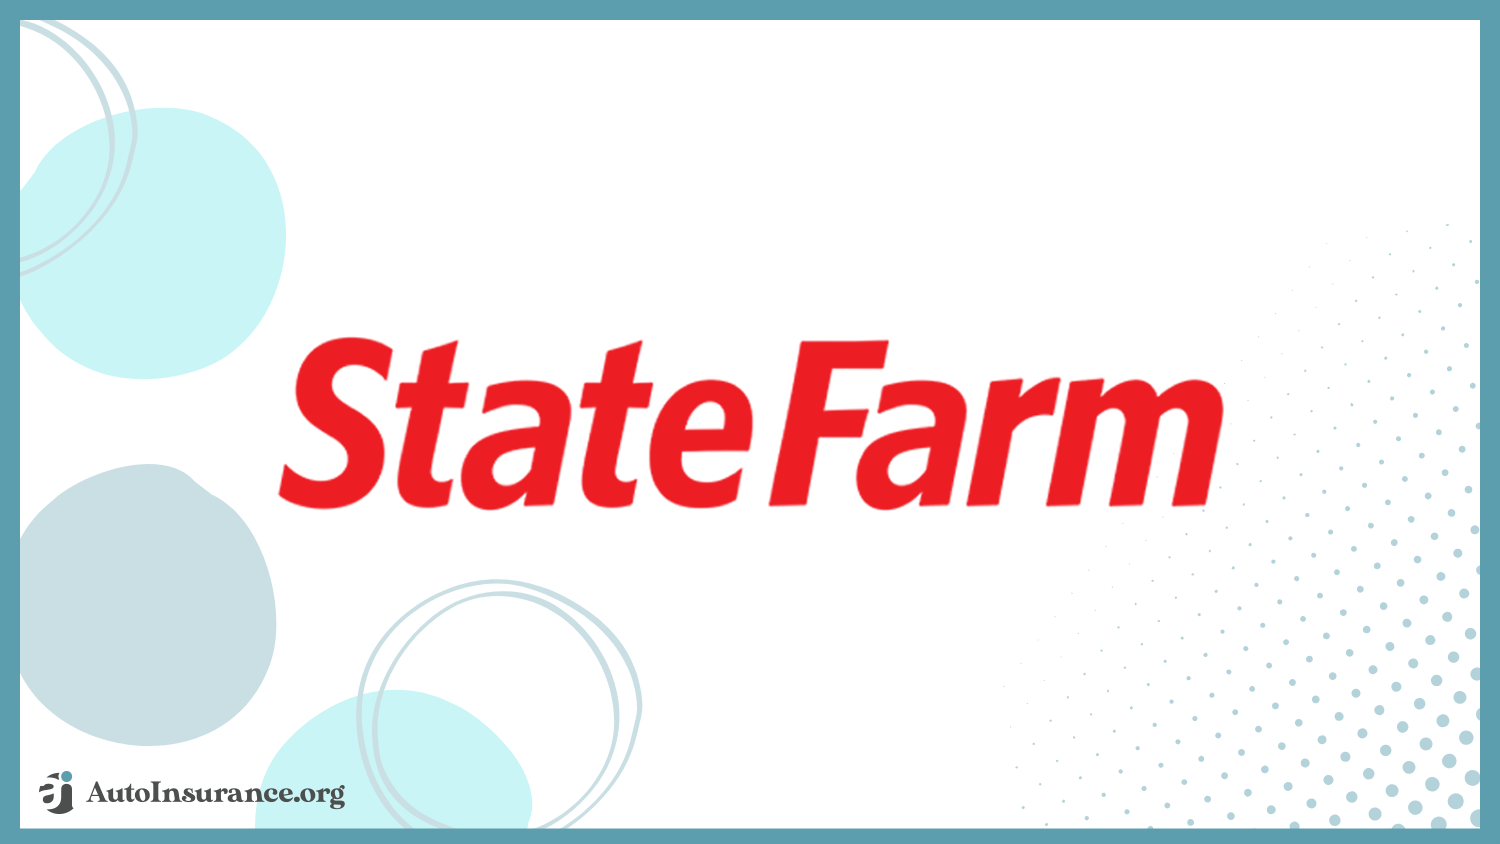 State Farm: Best Auto Insurance for the Wealthy